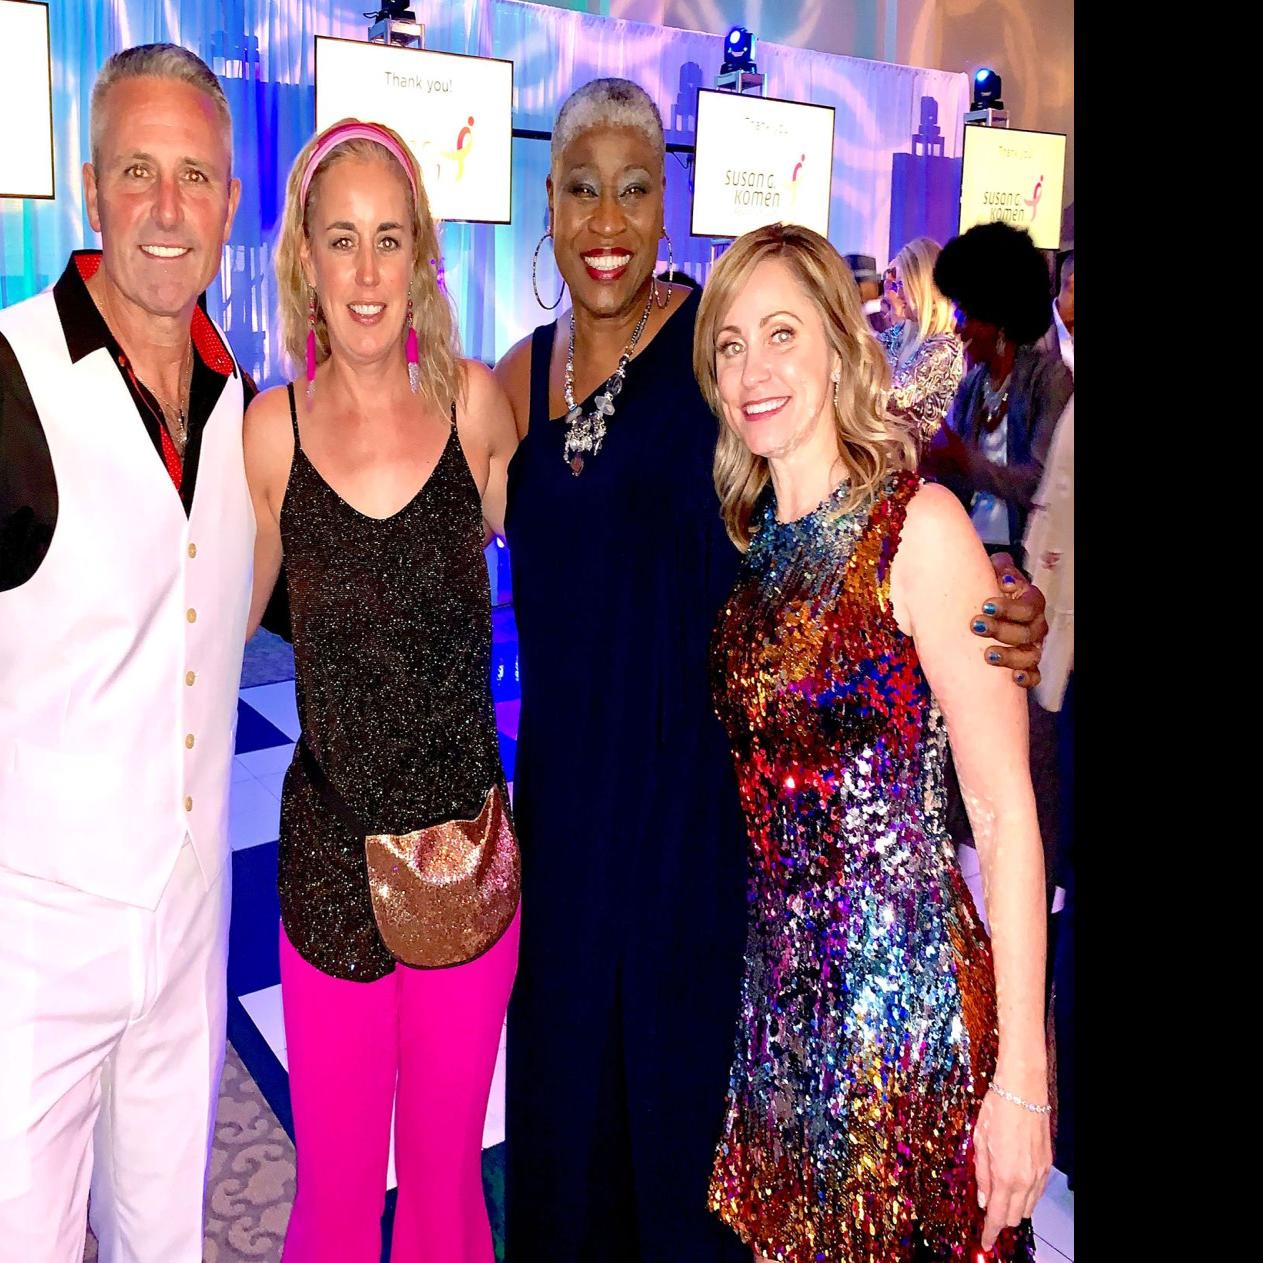 Bubbles and Bling benefitting Susan G. Komen Greater Atlanta's efforts to  blast breast cancer, Community News